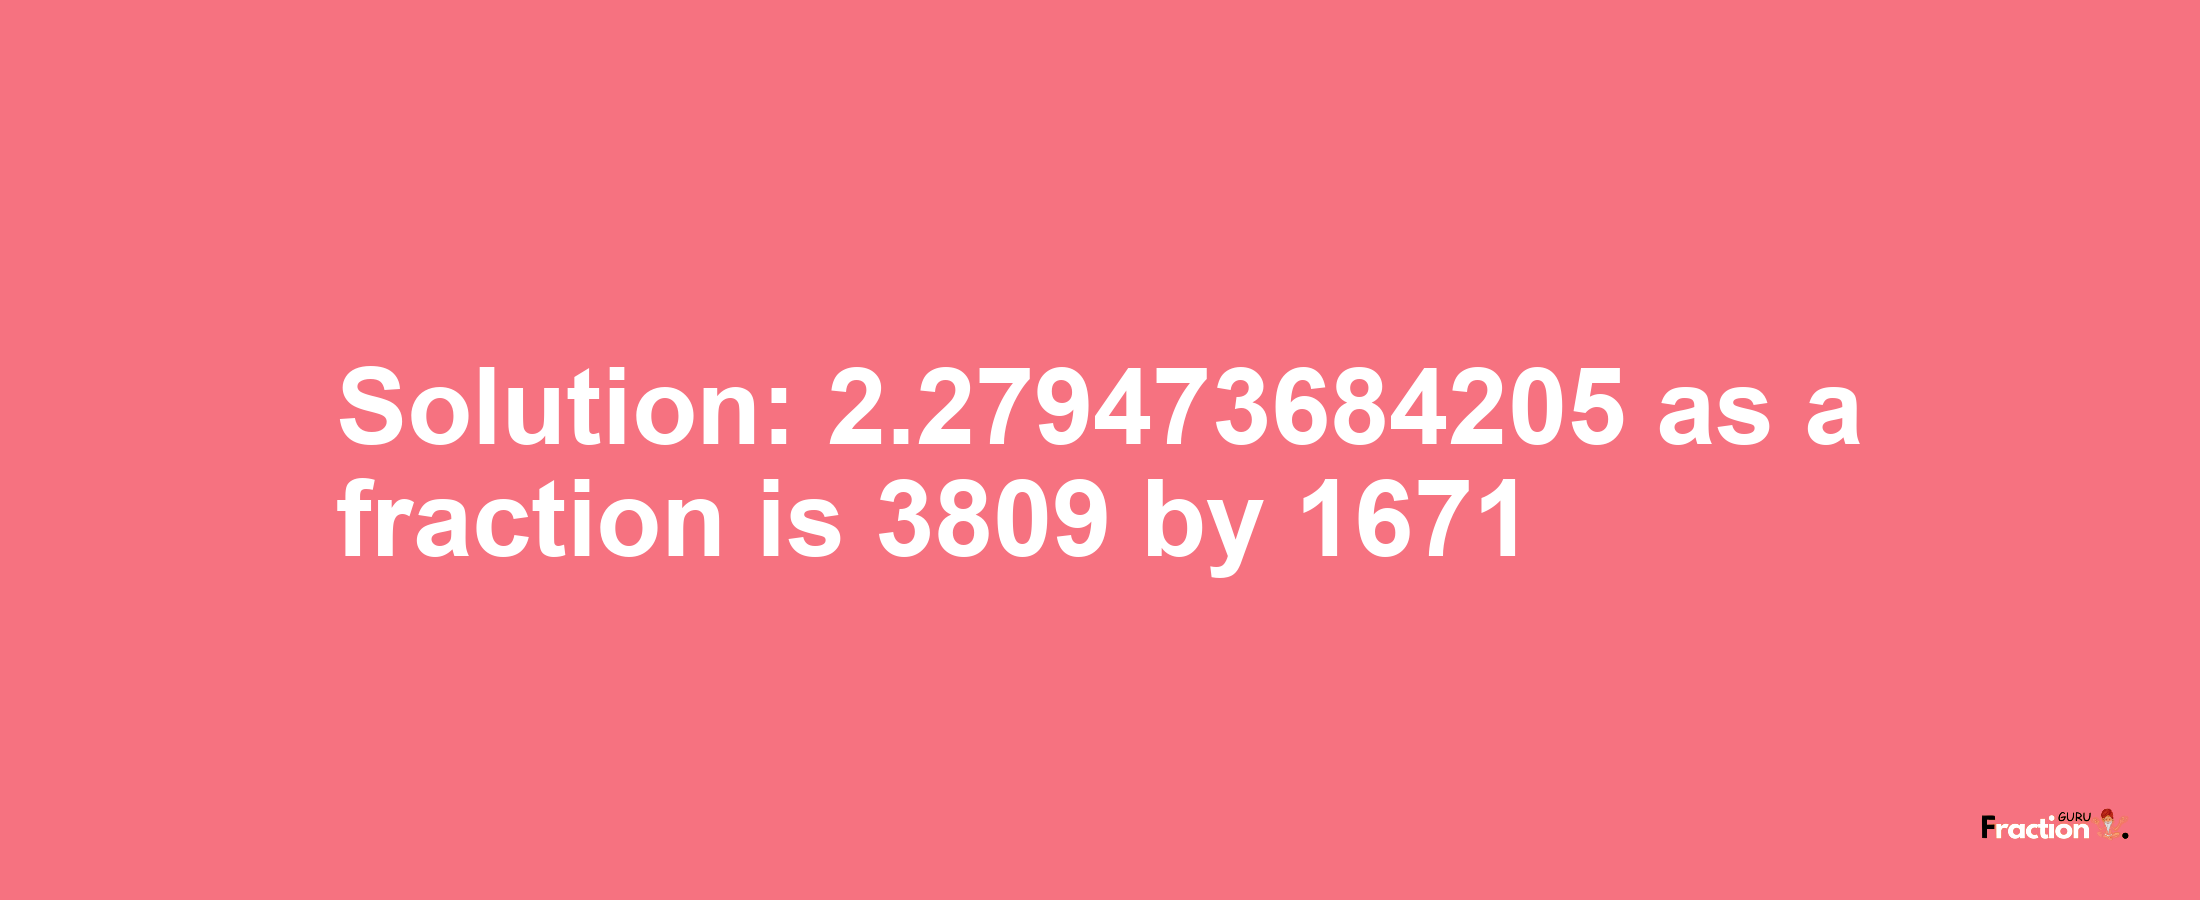 Solution:2.279473684205 as a fraction is 3809/1671